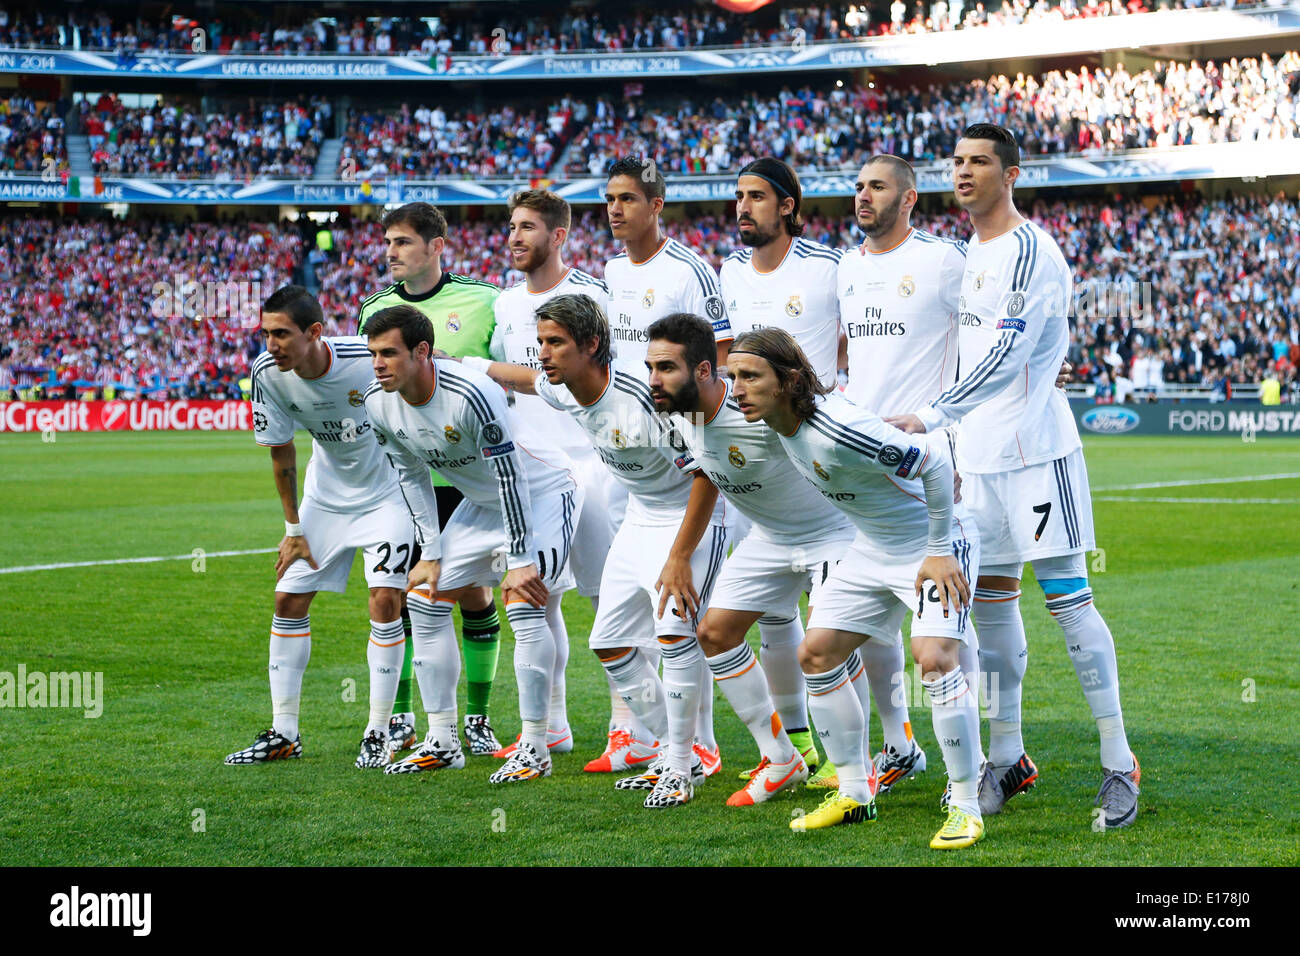 2014 real madrid champions league